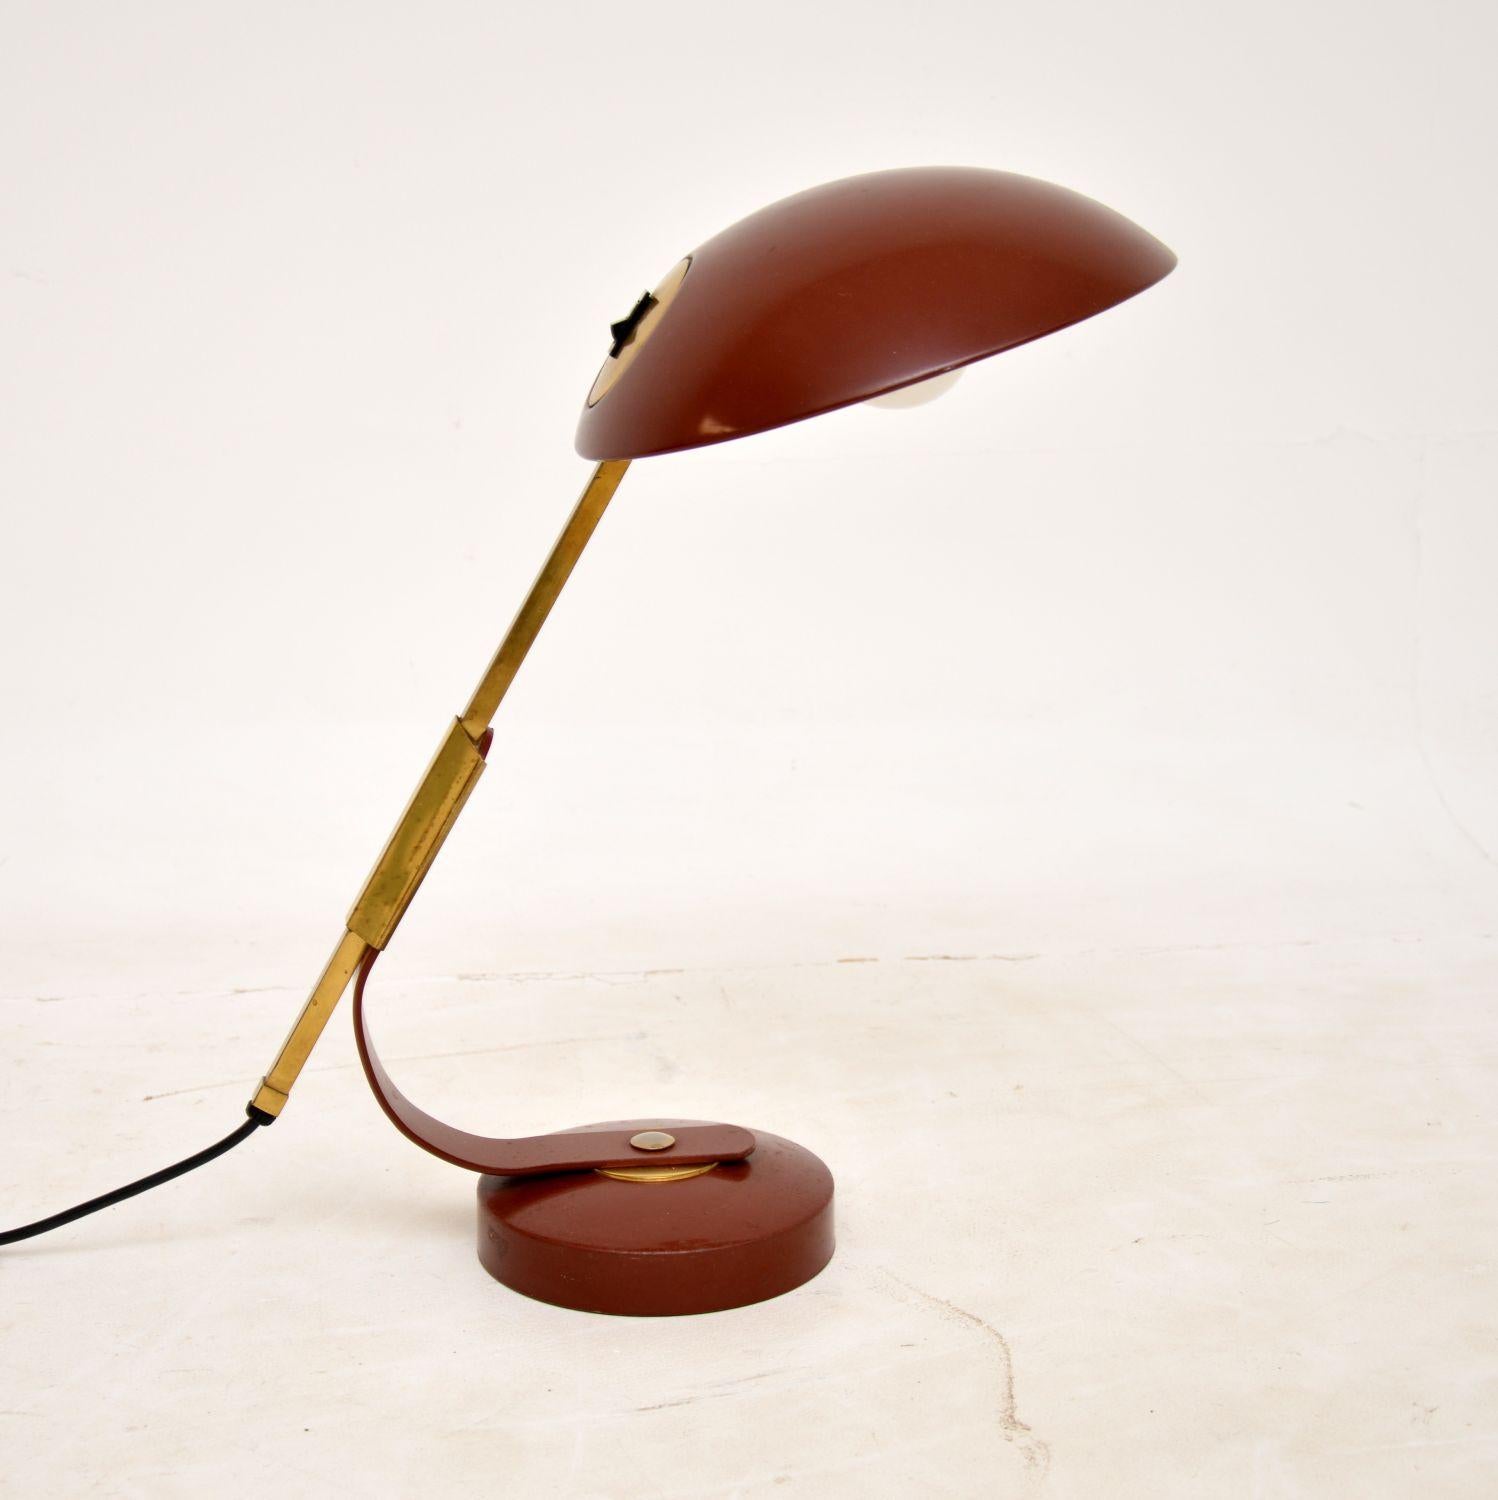 A very stylish and well made vintage desk lamp by Solere, Paris. This was made in France in the 1960’s, it was designed by Ferdinand Solere.

It is of amazing quality, it is finished in scarlet red enamel metal and brass. It has a gorgeous design,